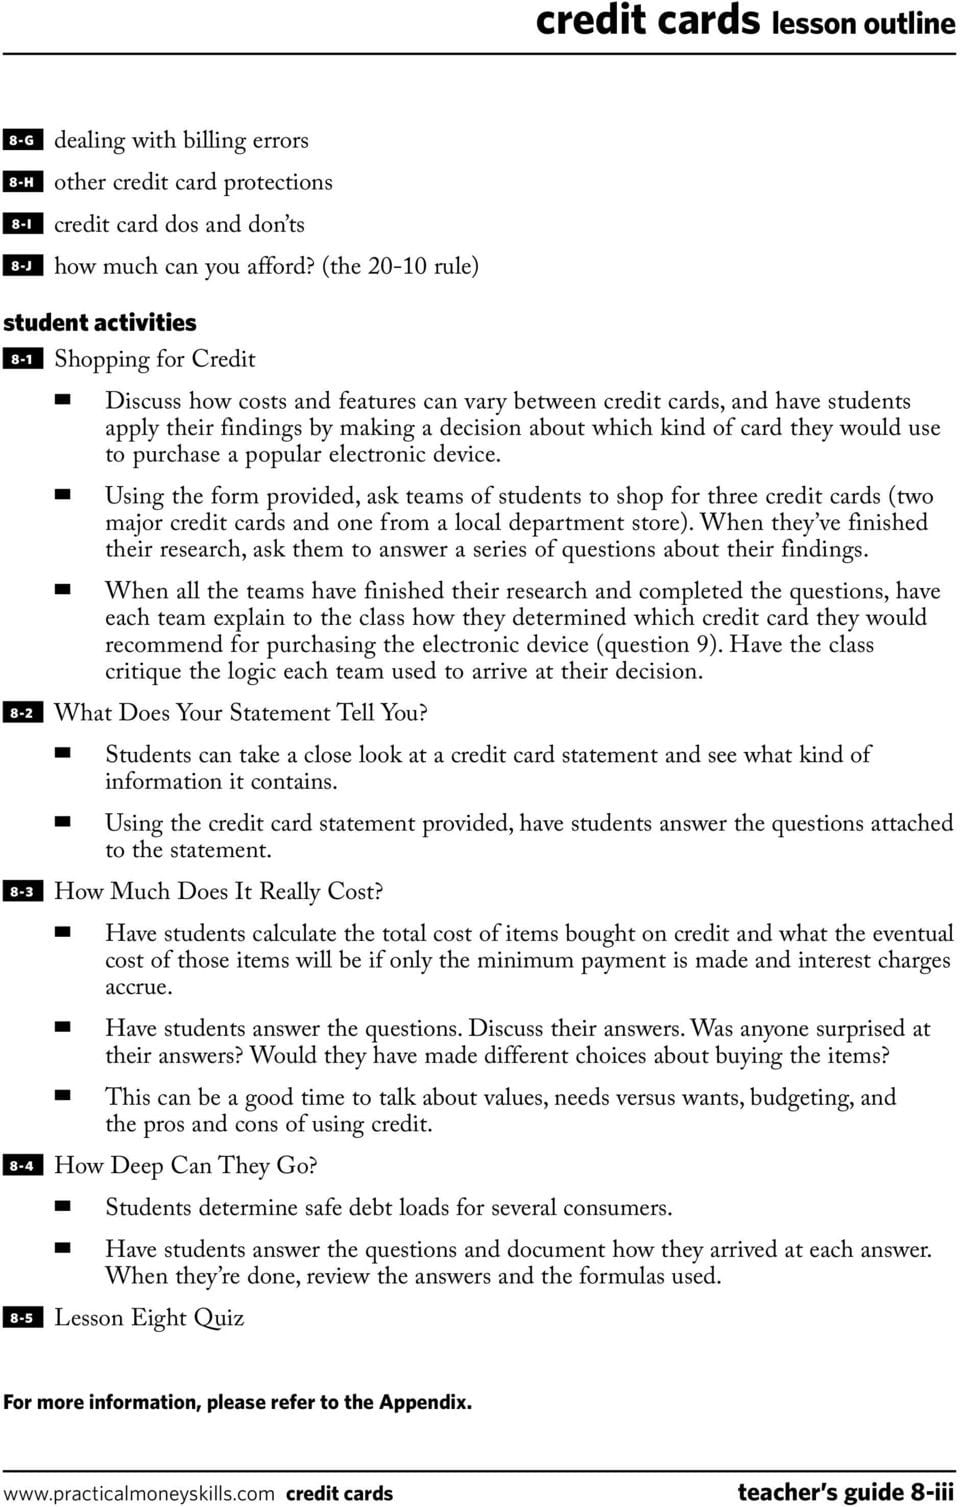 shopping-for-a-credit-card-worksheet-answers-db-excel